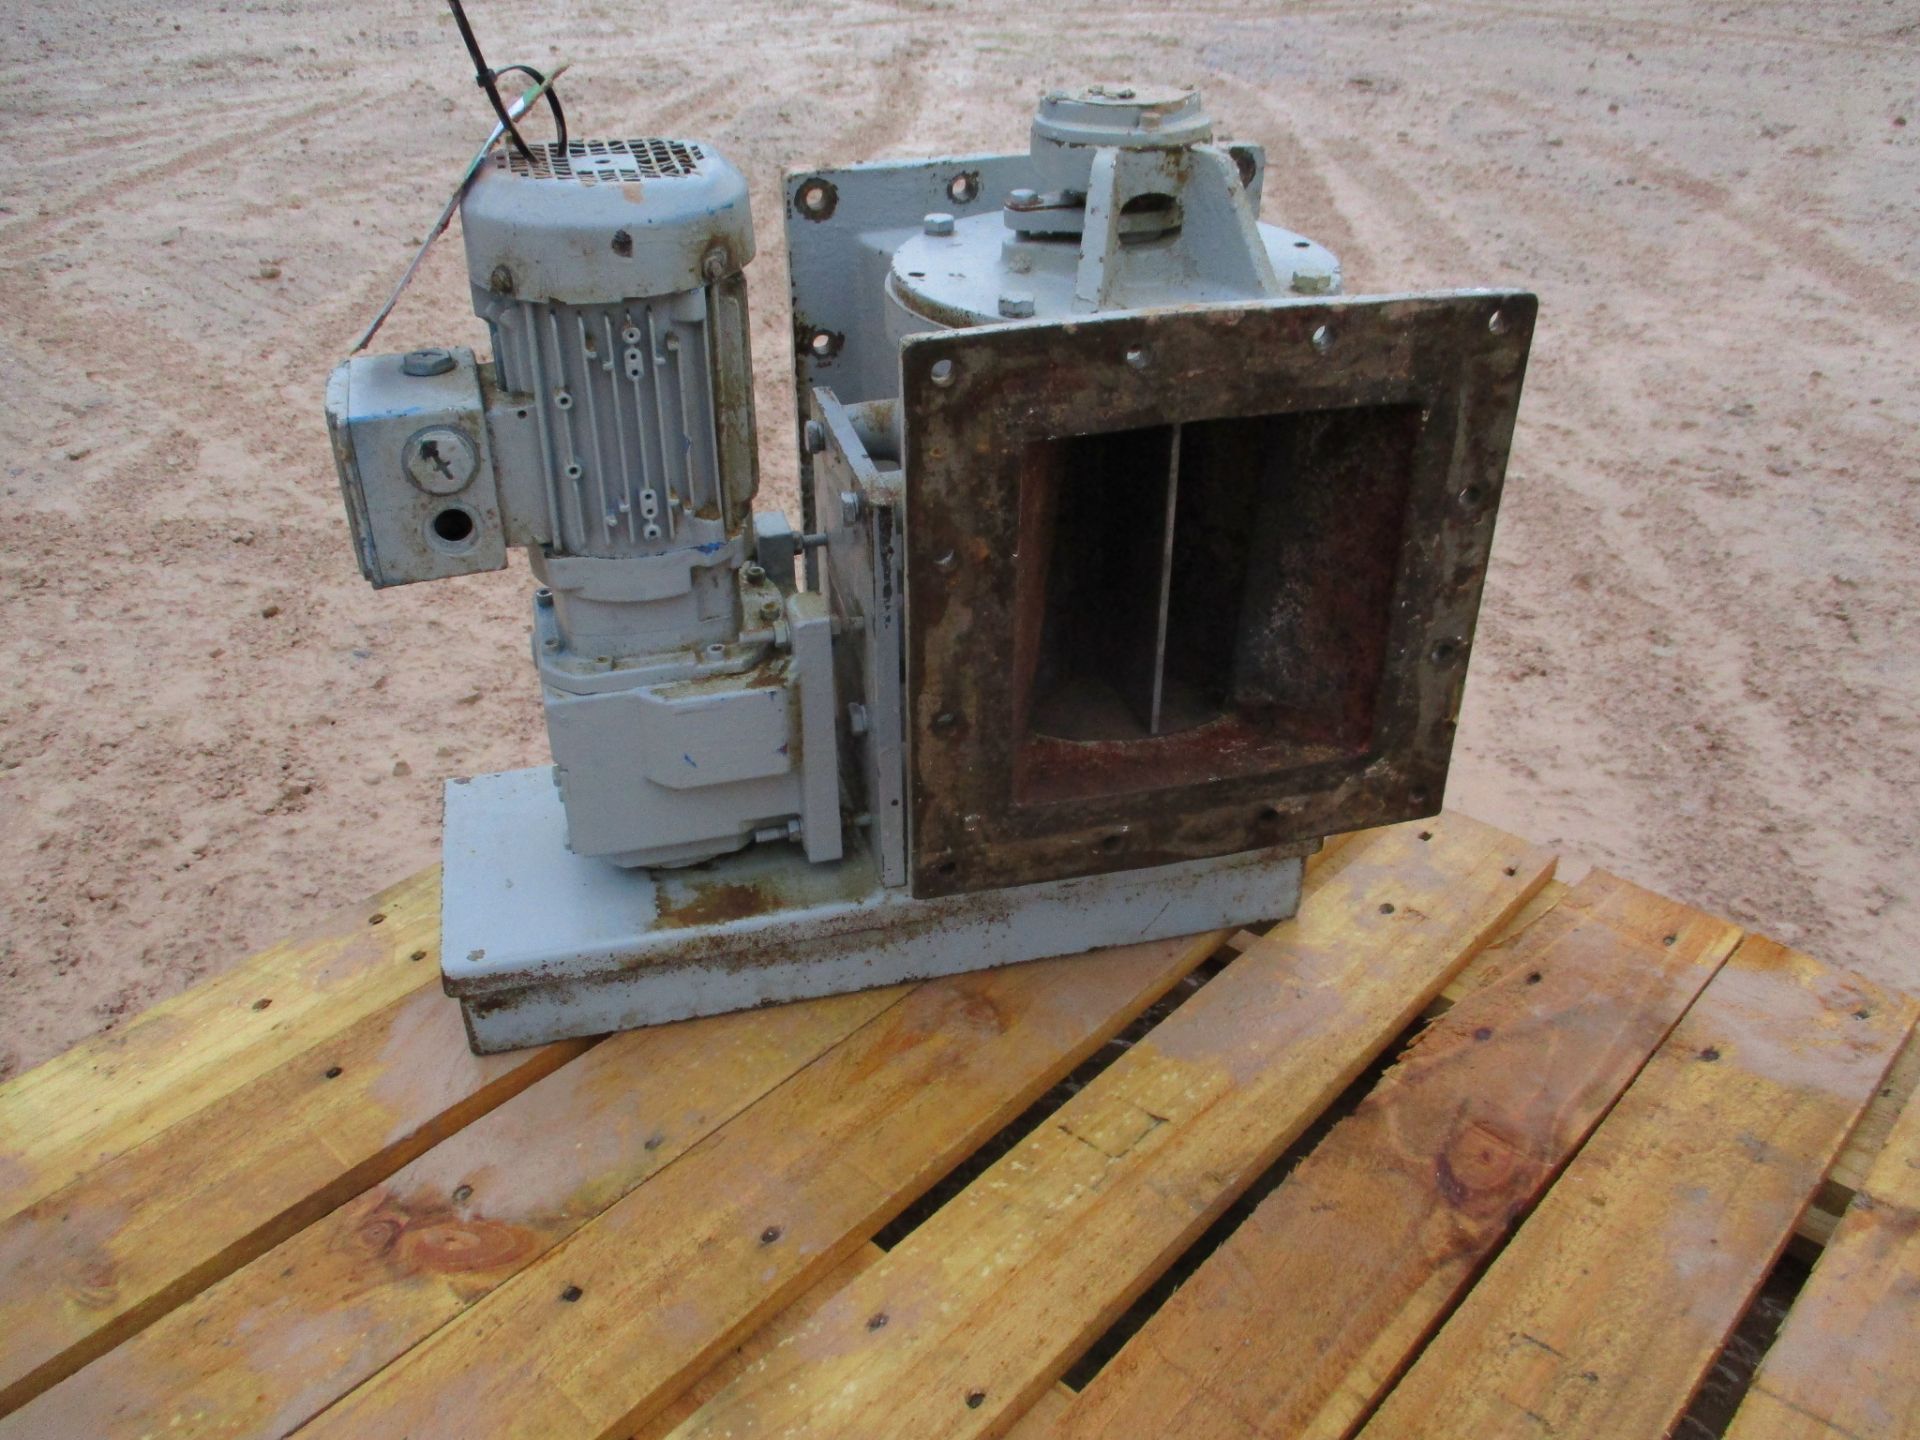 Rotolock 20RNSCM02 Rotary Valve, with motors, loading free of charge – yes, item located in Leyland, - Image 3 of 7